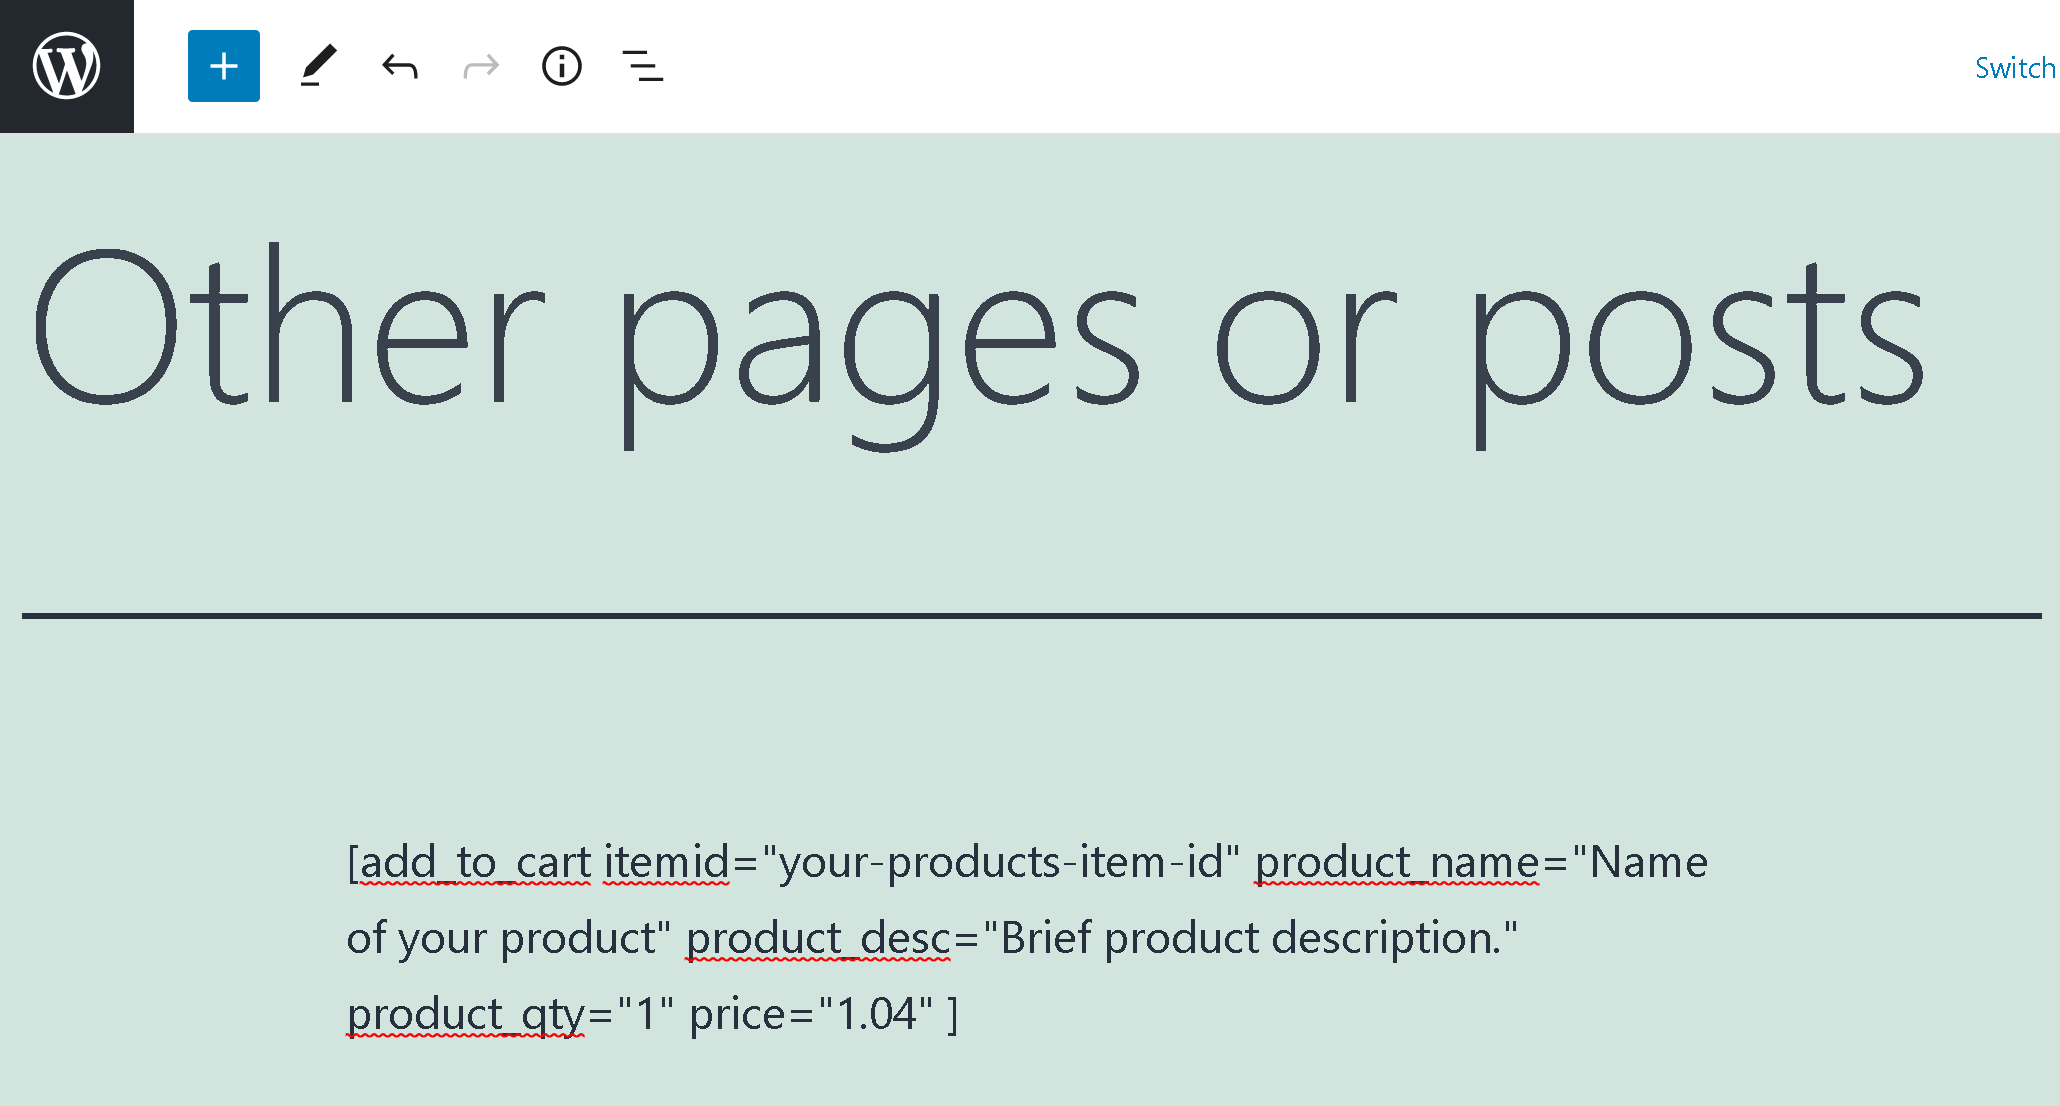 On other pages you can create add to cart buttons using [add_to_cart /] shortcodes using the following attributes - itemid, product_name, product_desc, product_qty.